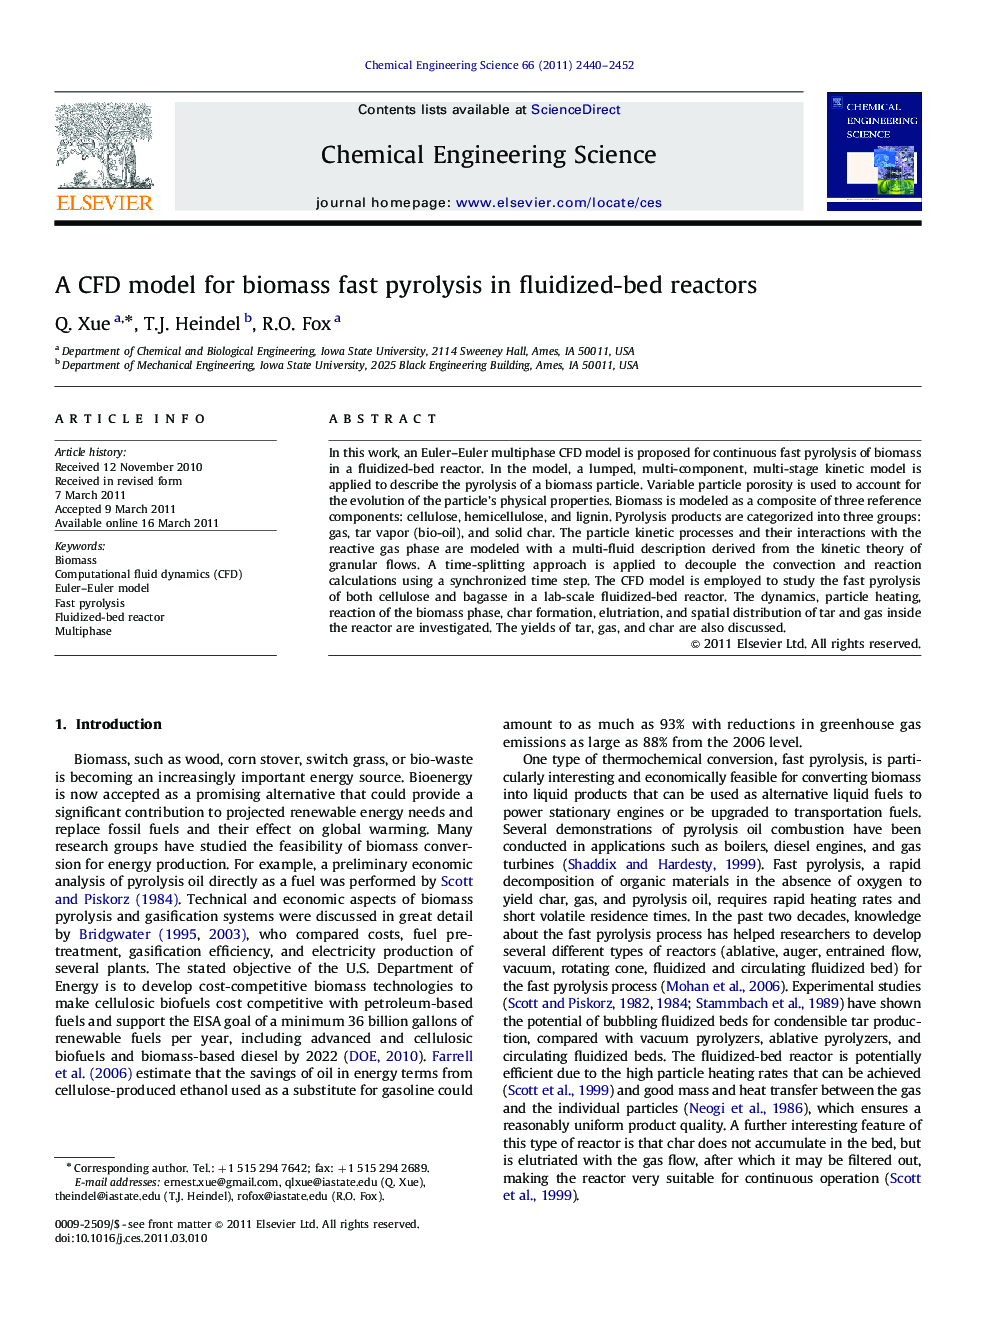 A CFD model for biomass fast pyrolysis in fluidized-bed reactors